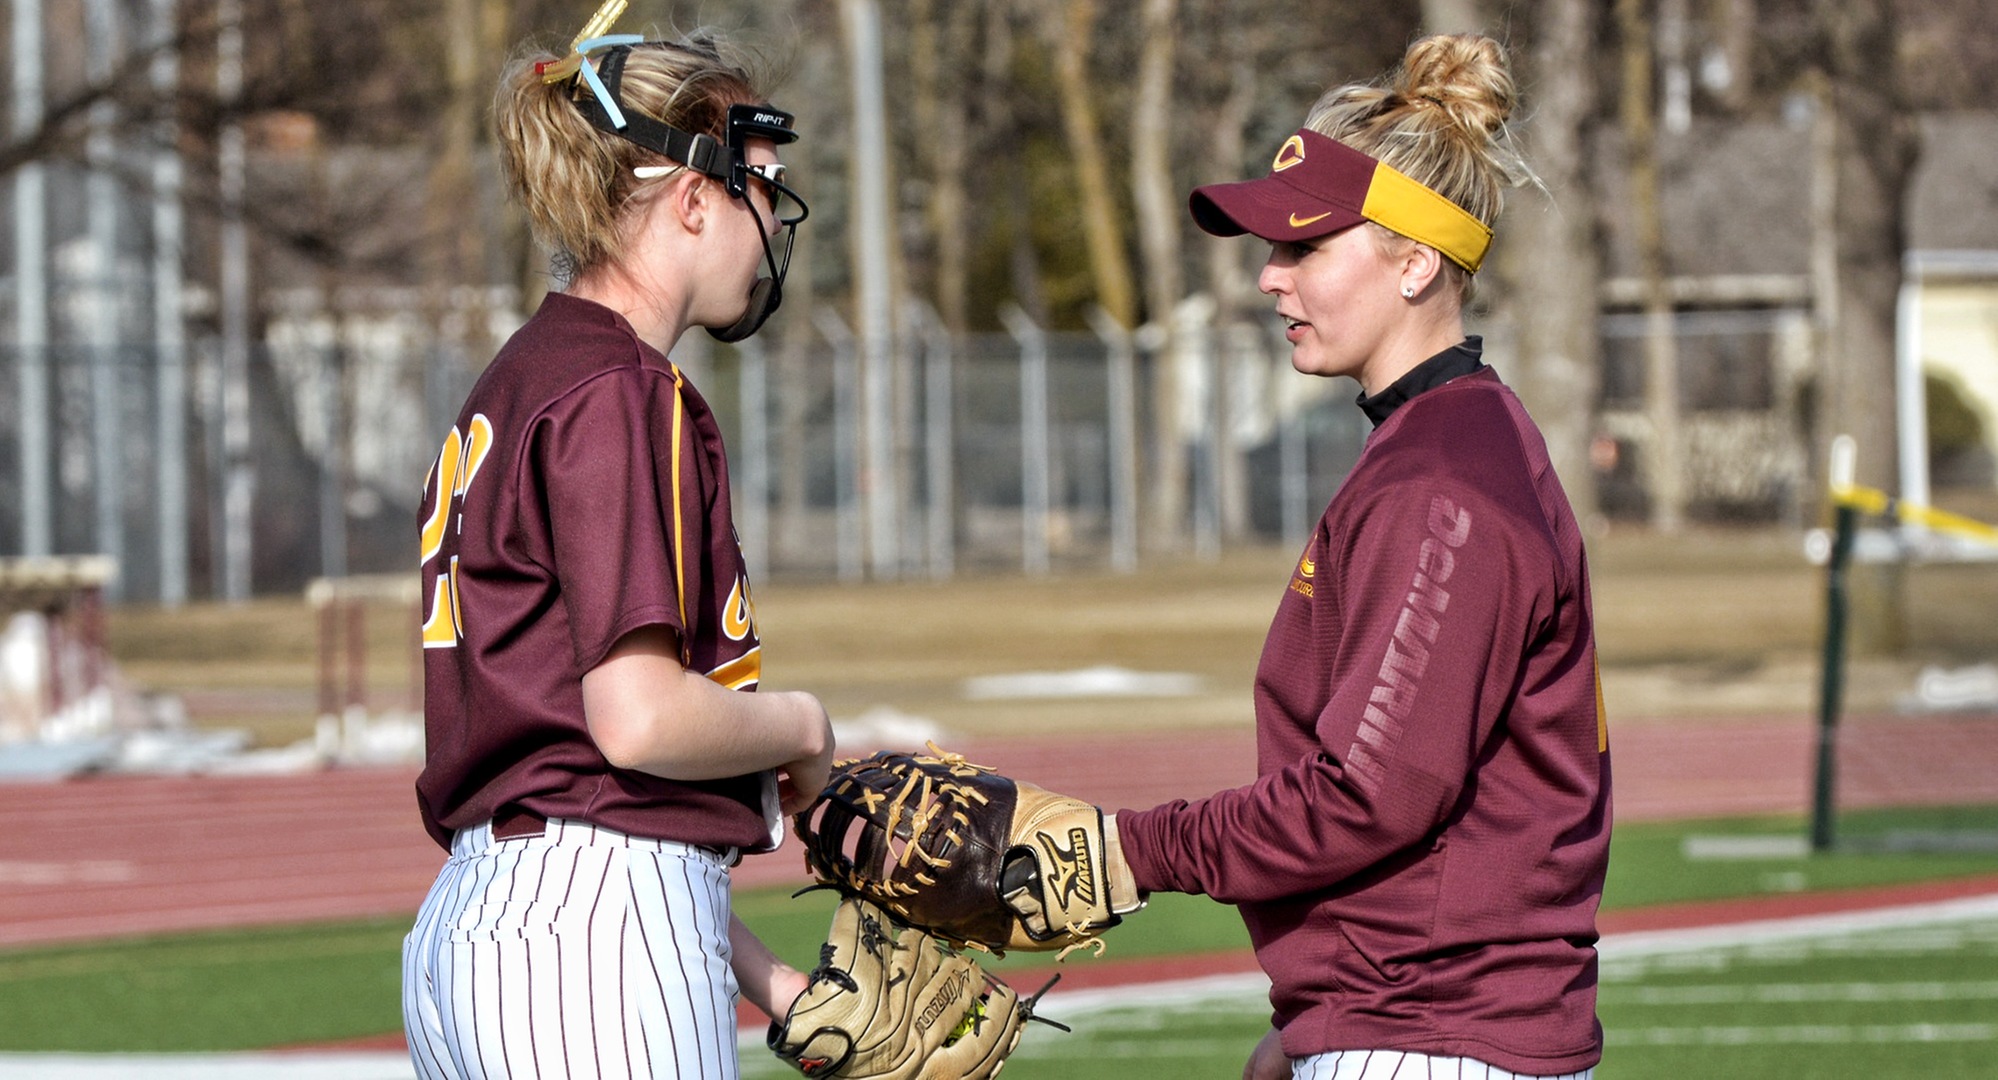 Megan Gavin (L) earned her first collegiate save and Sydney Roberts (R) hit a 2-run home run in the Cobbers' sweep at St. Mary's.